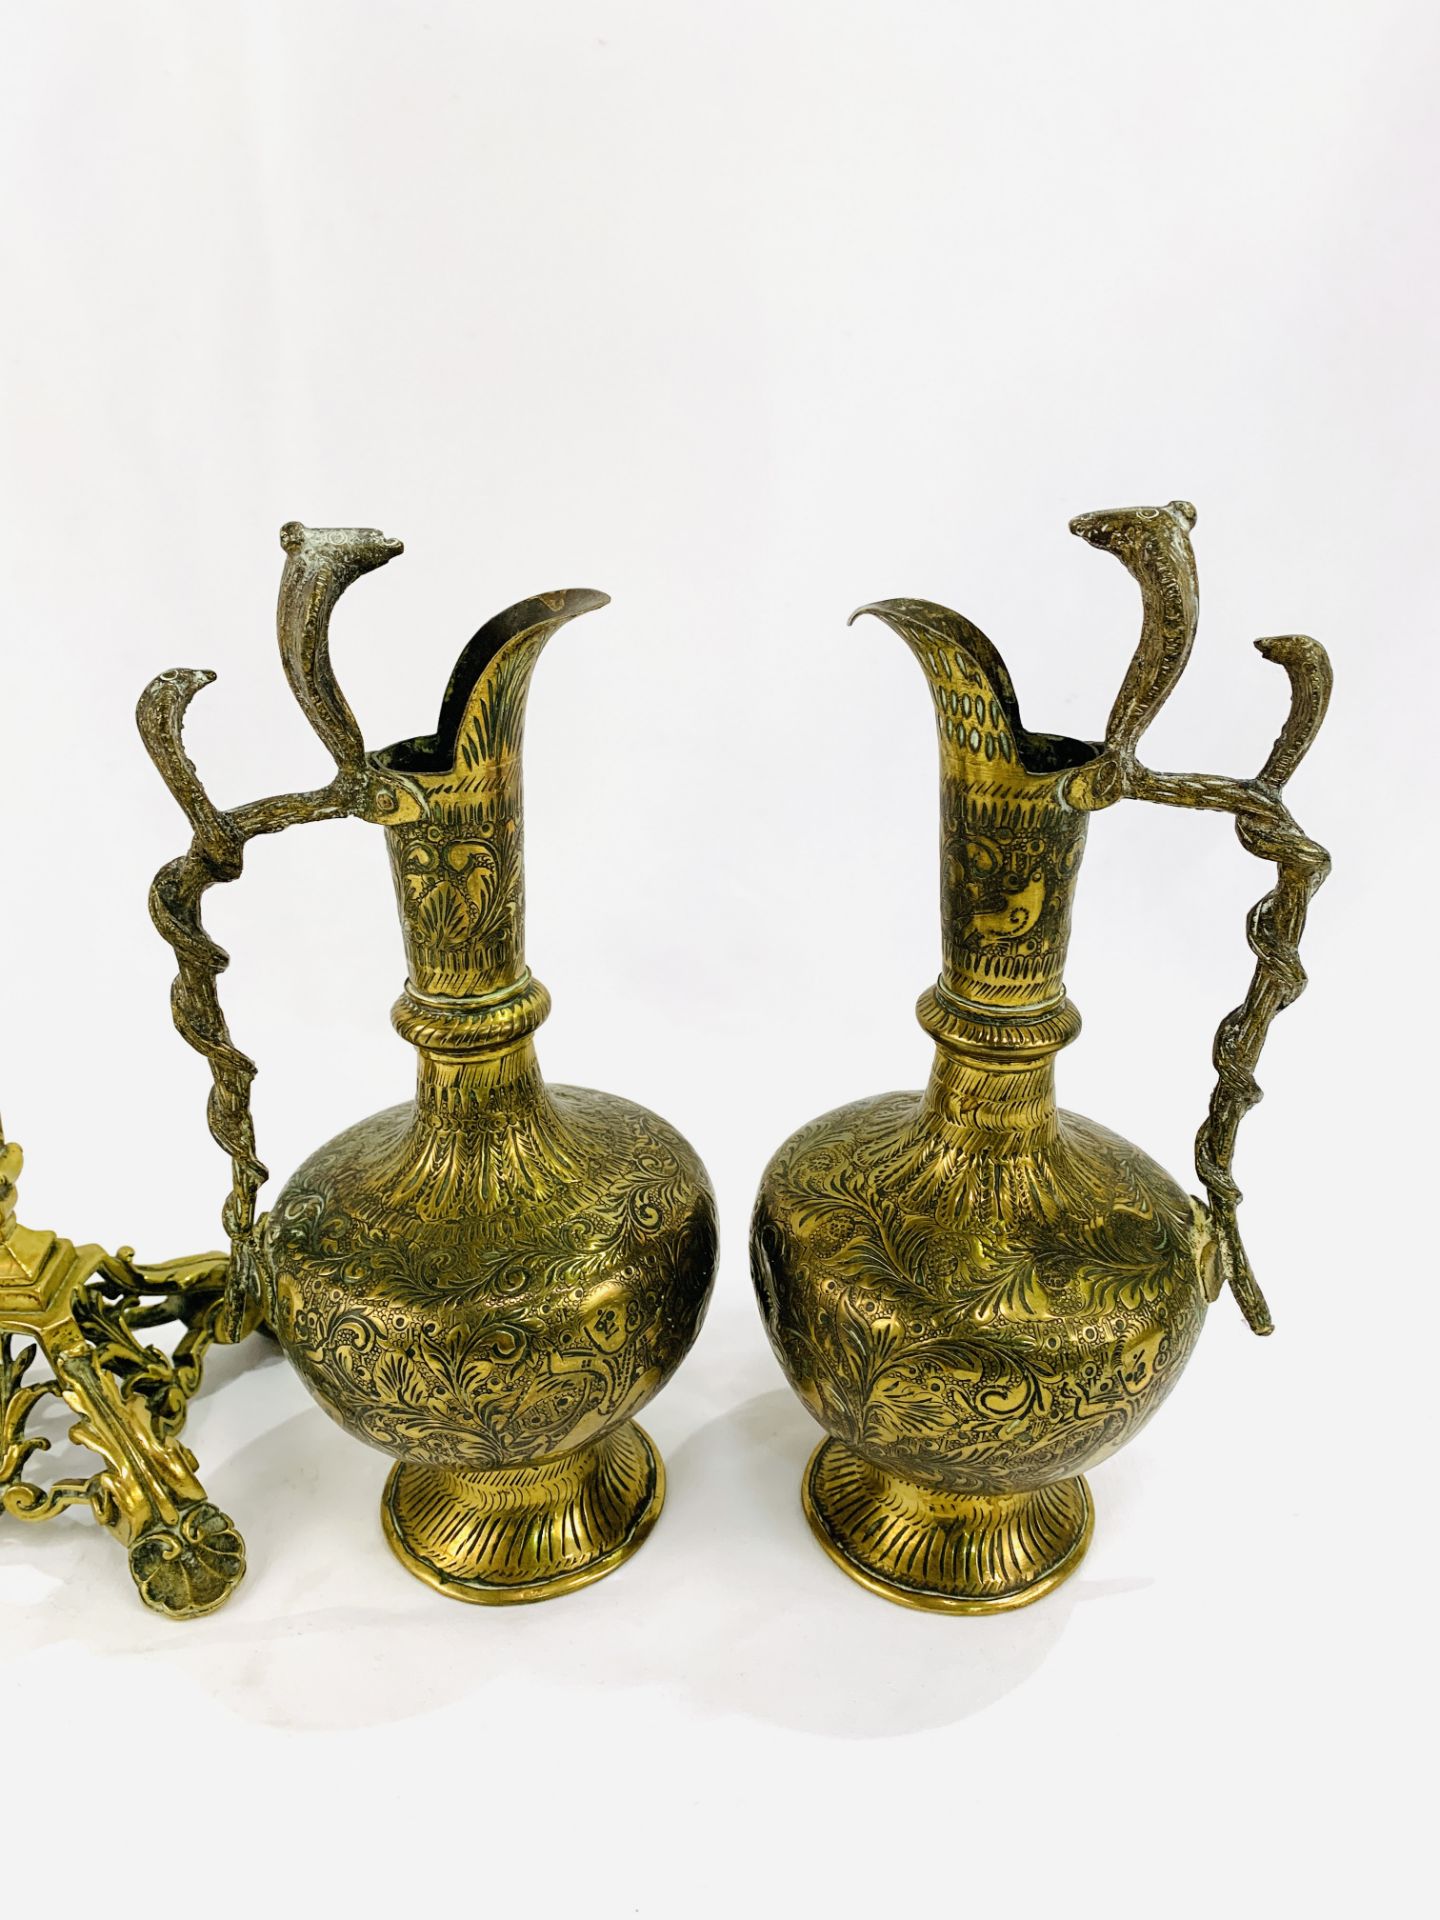 Pair of brass figural candlesticks with two Indian brass ewers - Image 4 of 4